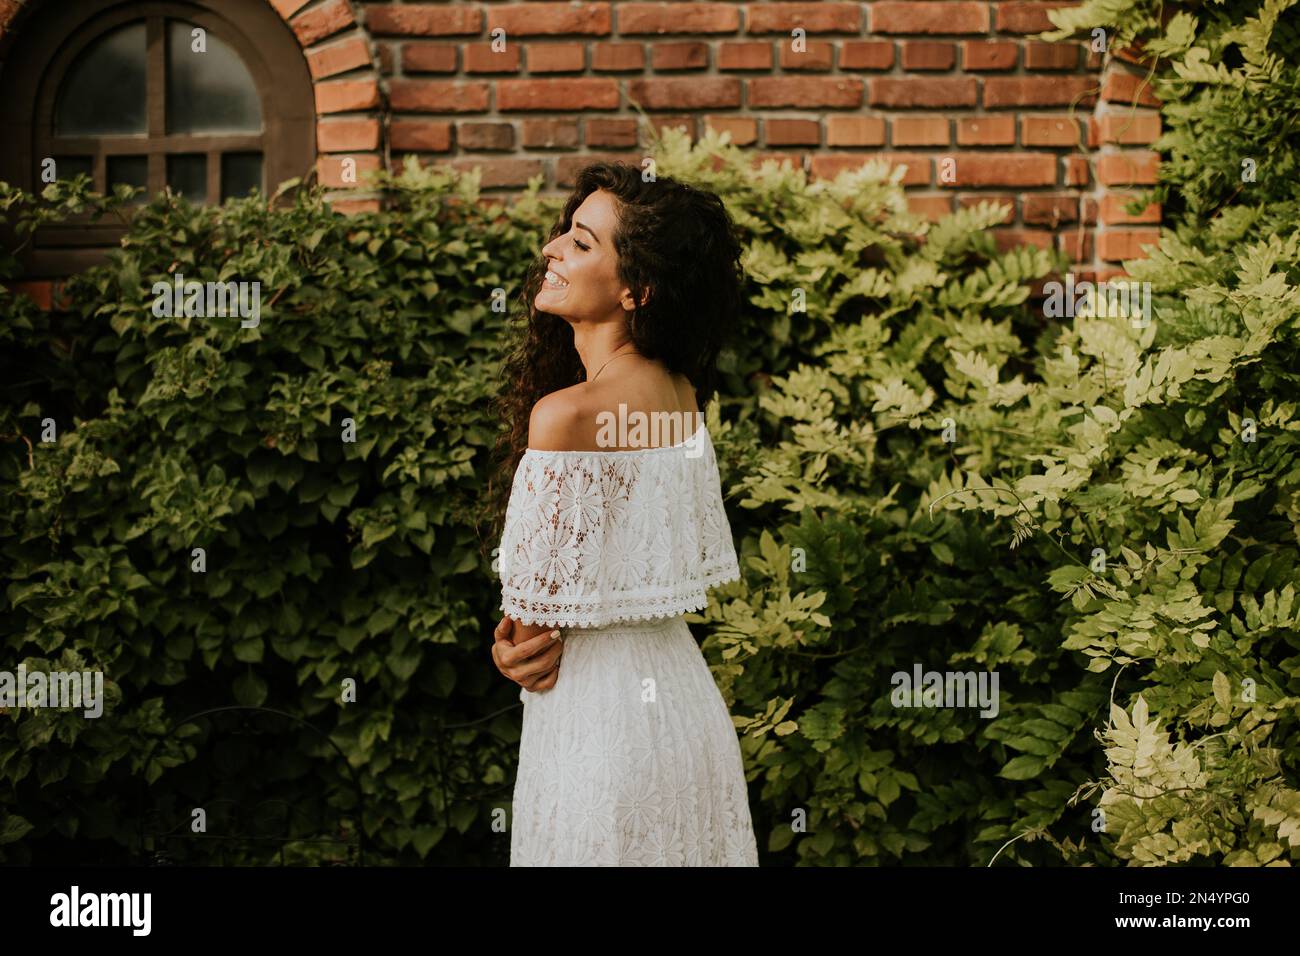 Pretty young woman with curly hair stands in a beautiful garden, dressed in a white flowing dress. She looks relaxed and content Stock Photo